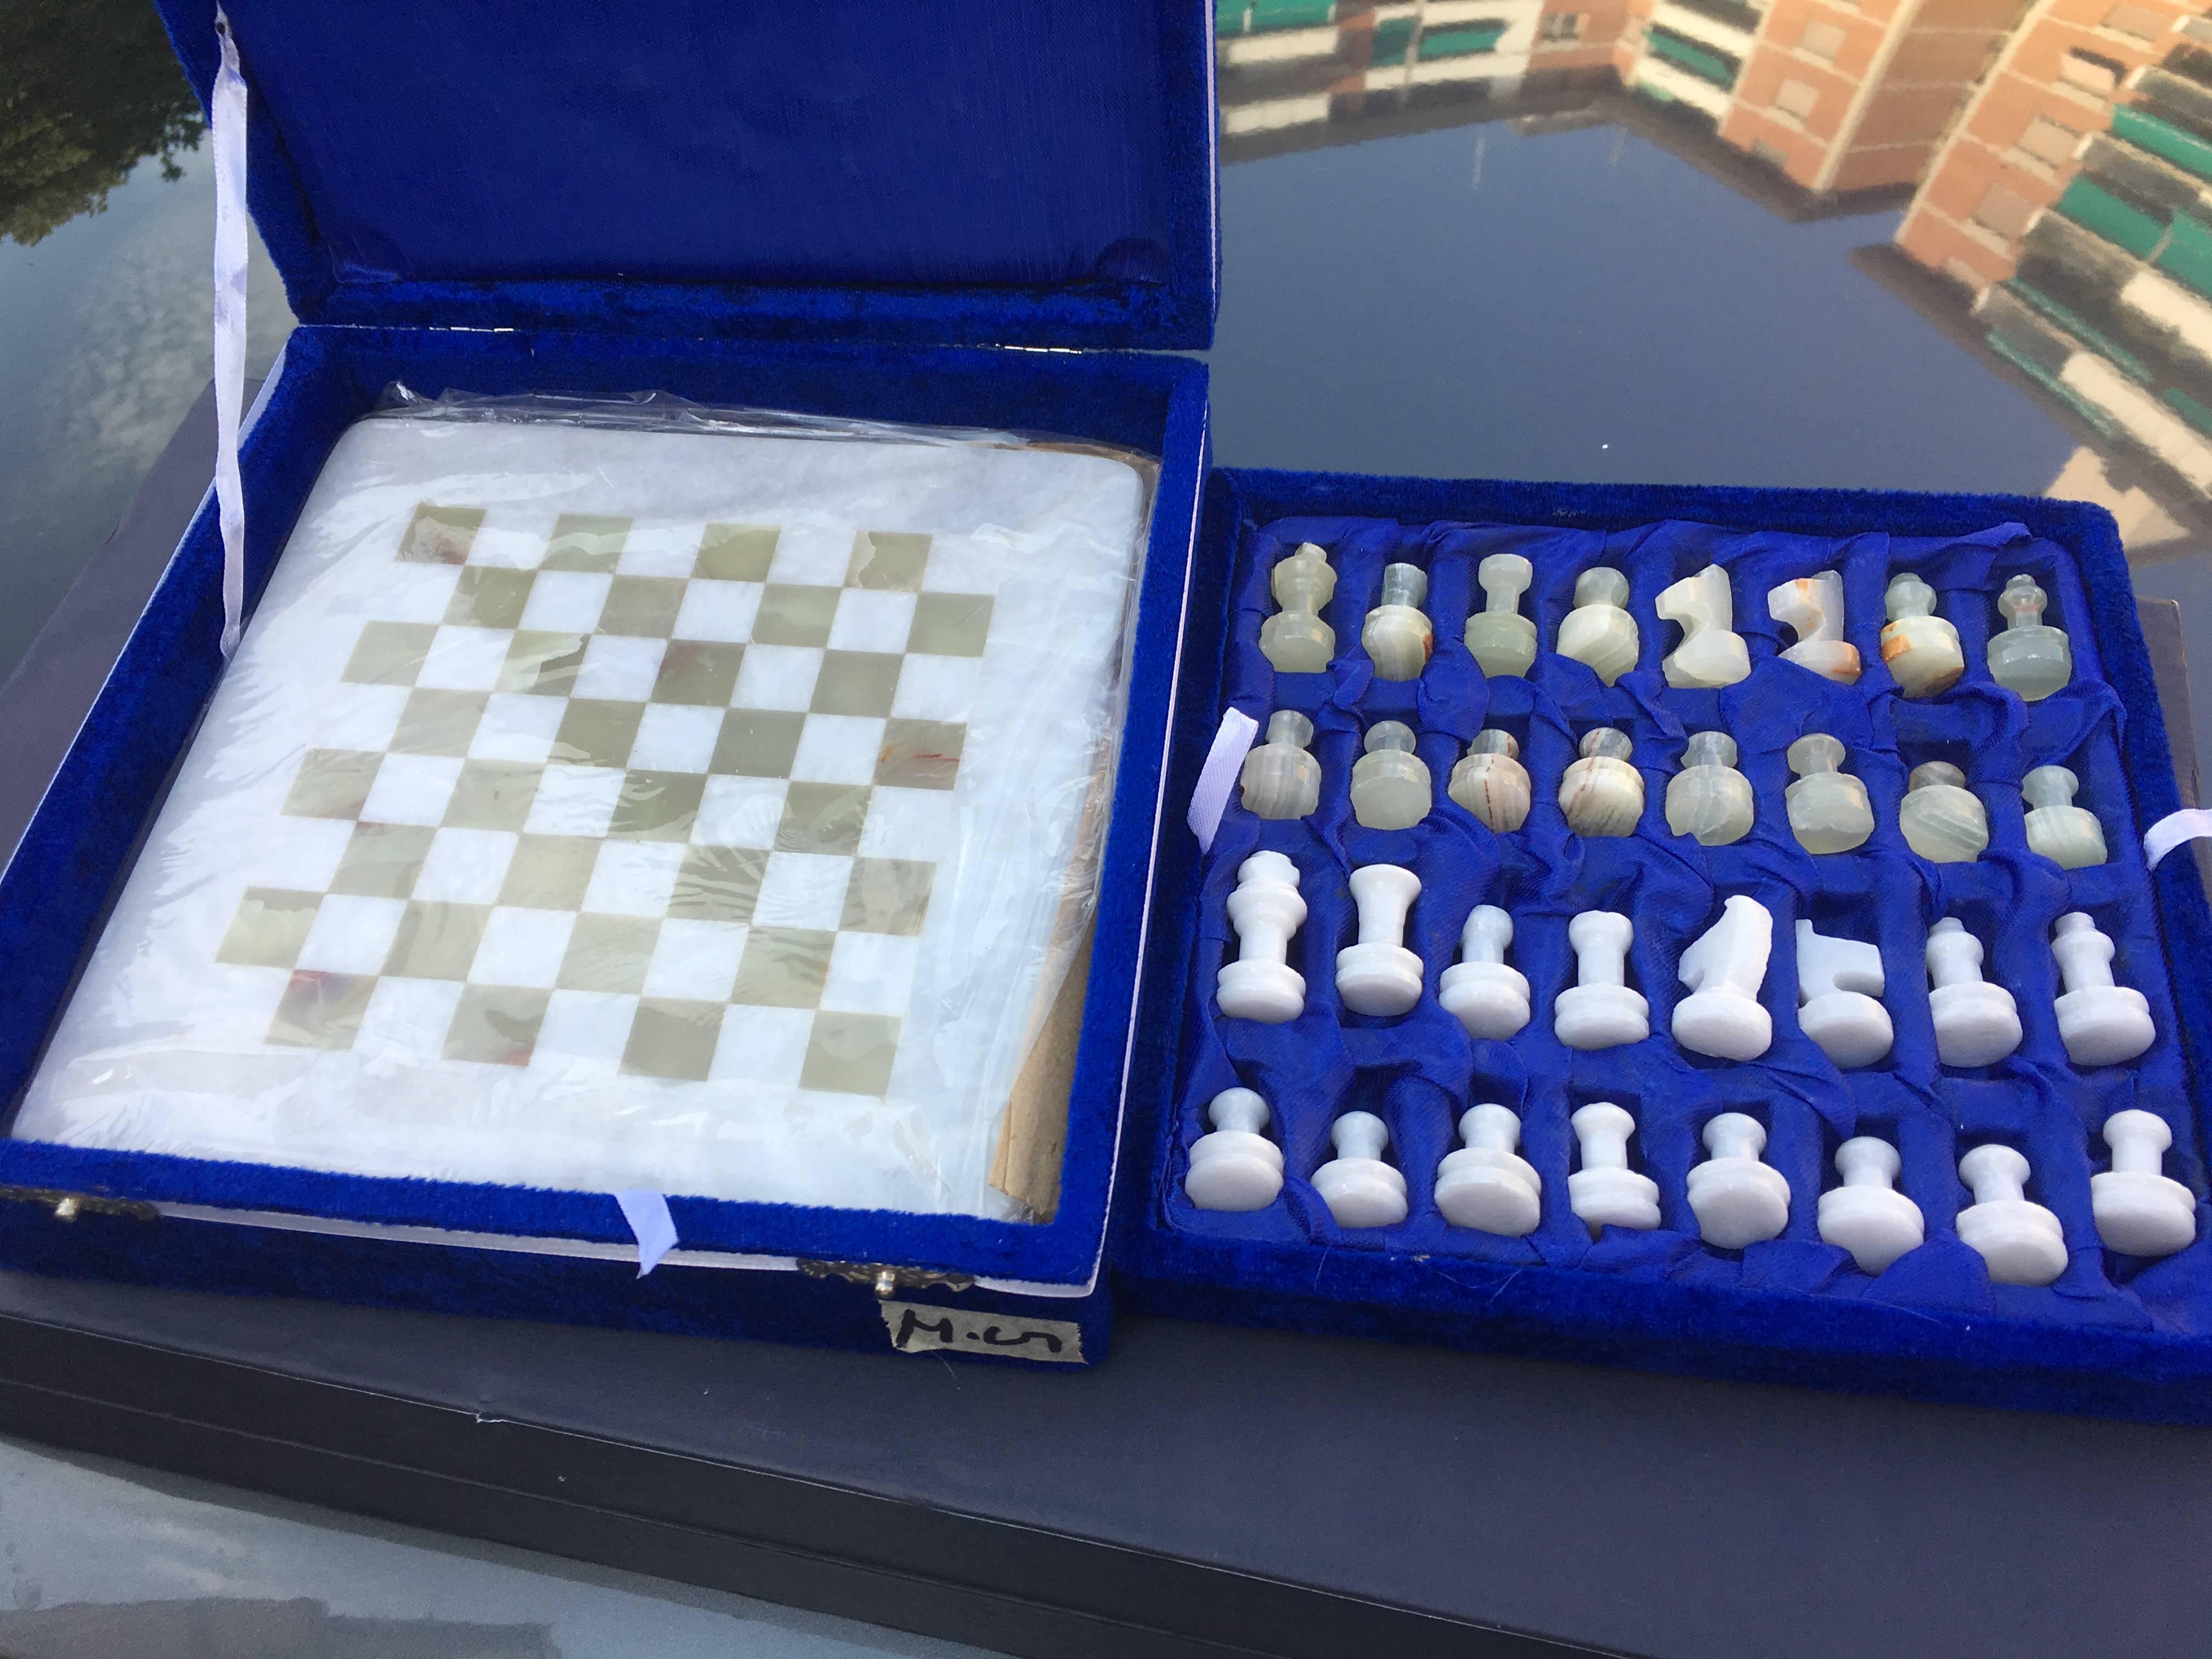 Unique Onyx chess set. Beautifully hand-carved from Onyx gemstone and white marble stone. This chess displays their own natural stone characteristics, blending banded shades of green, honey and brown. Genuine white marble provides a rich contrast,